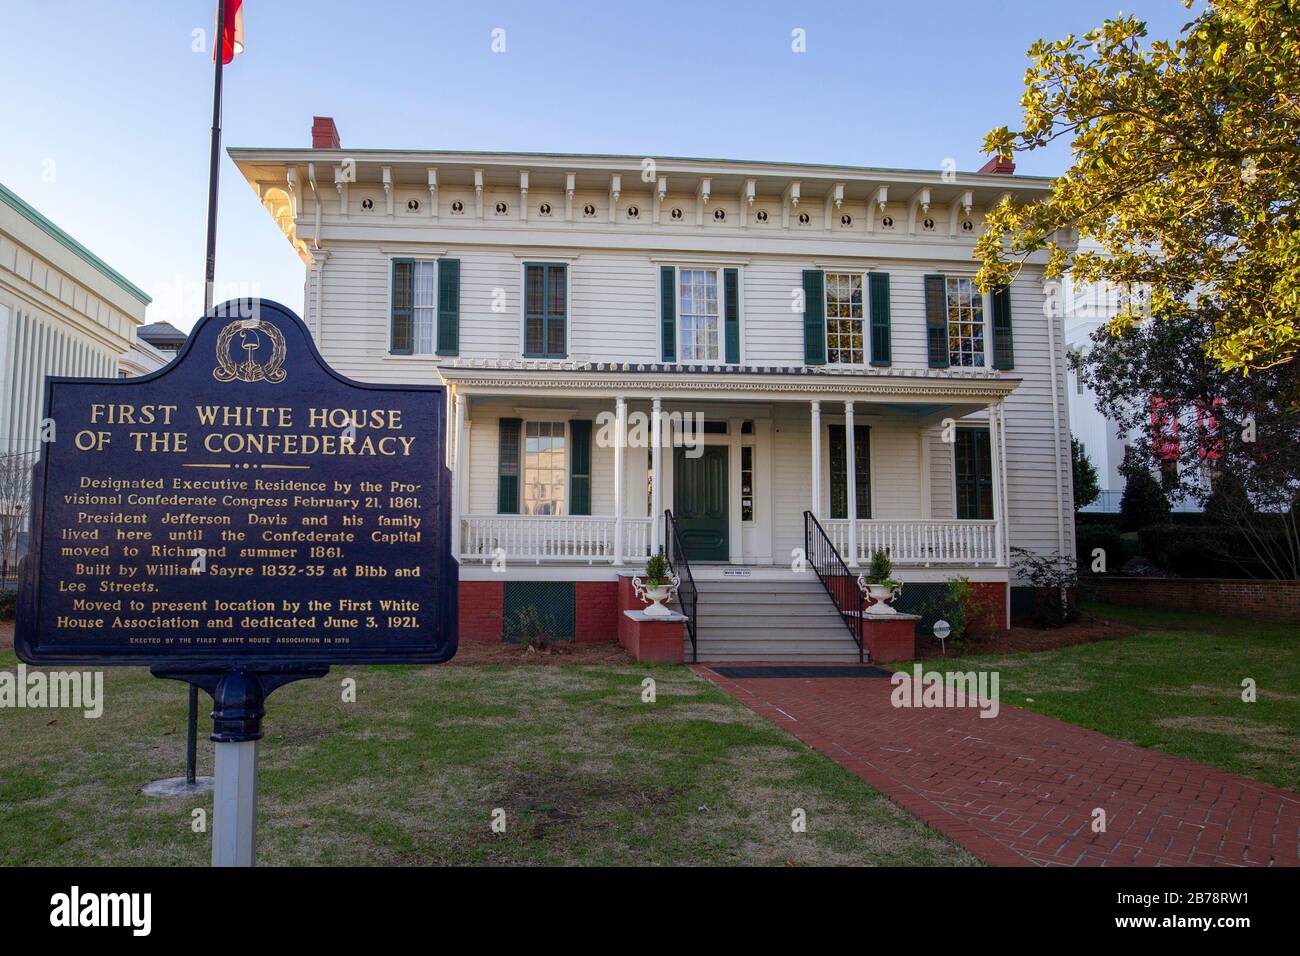 The First White House of the Confederacy while the capital of the Confederate States of America was in Montgomery, Alabama. Stock Photo